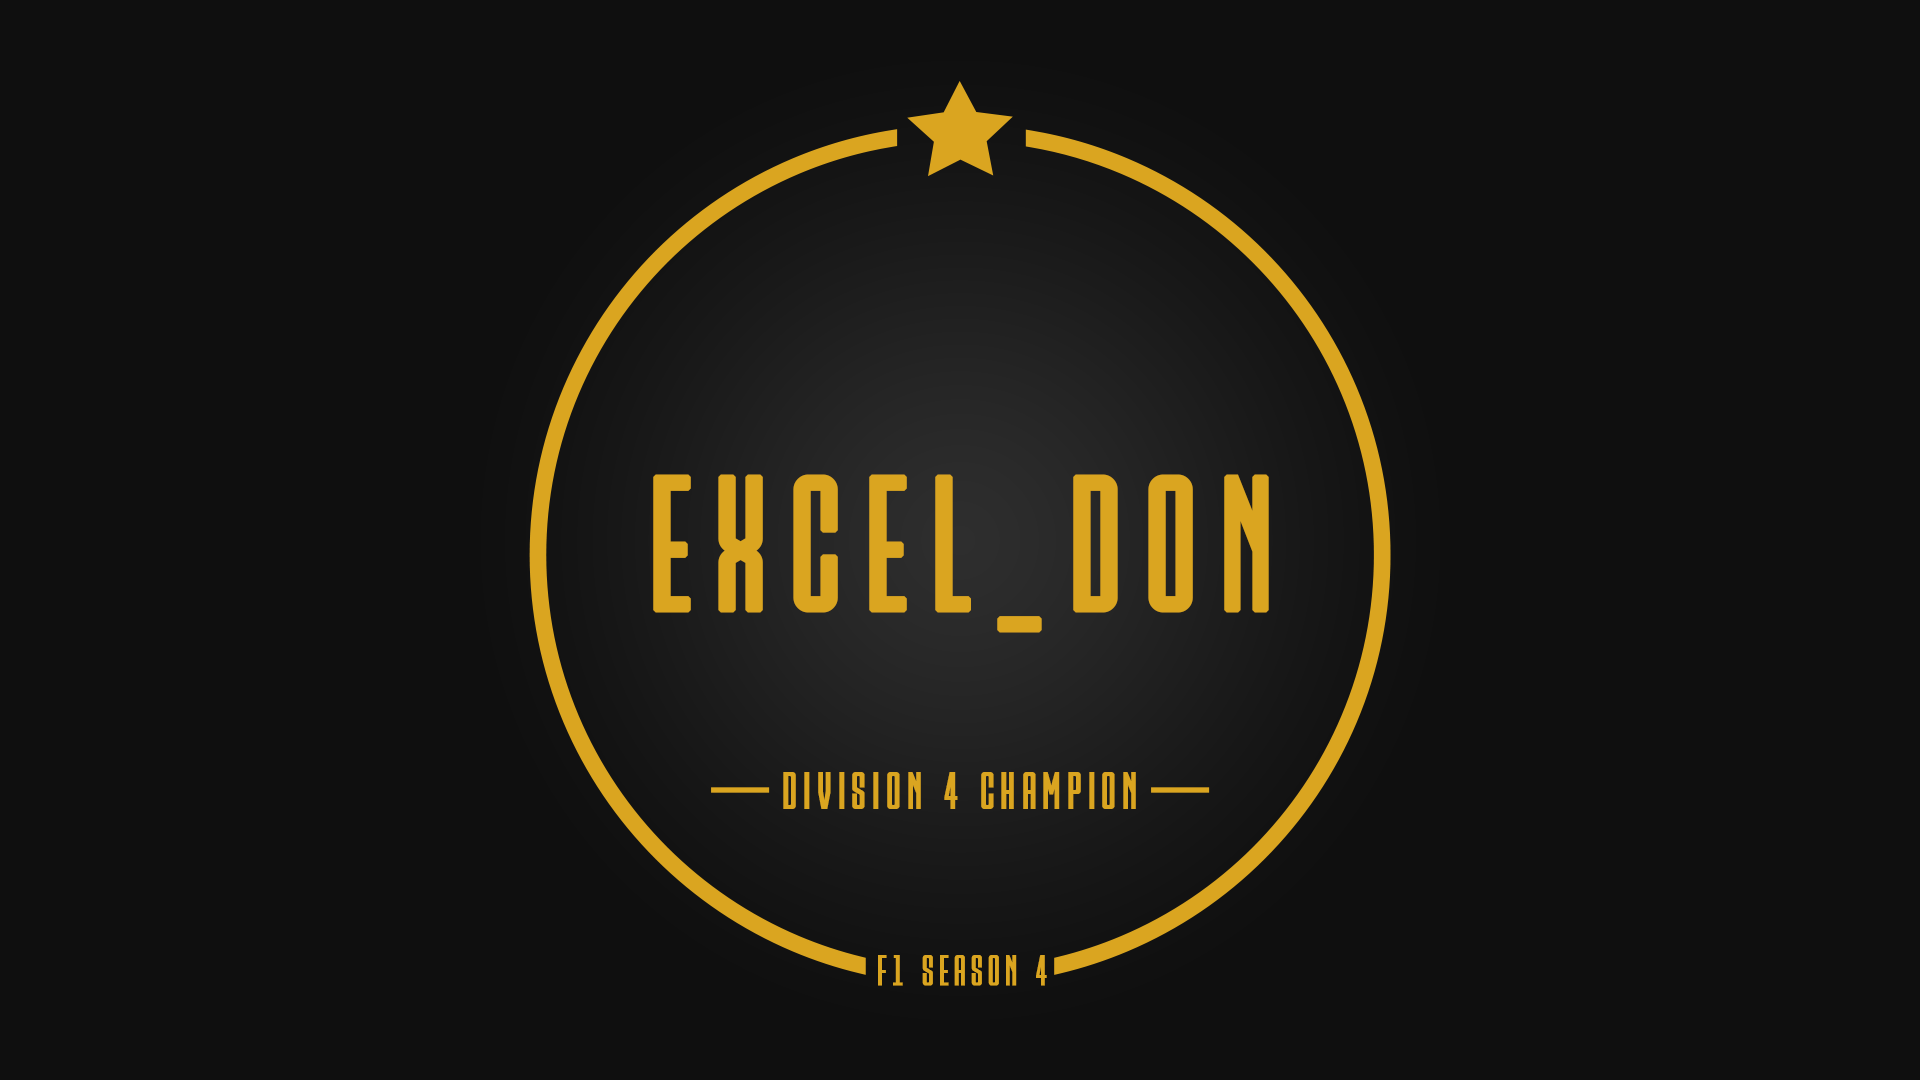 Division 4 Champion - Excel_Don